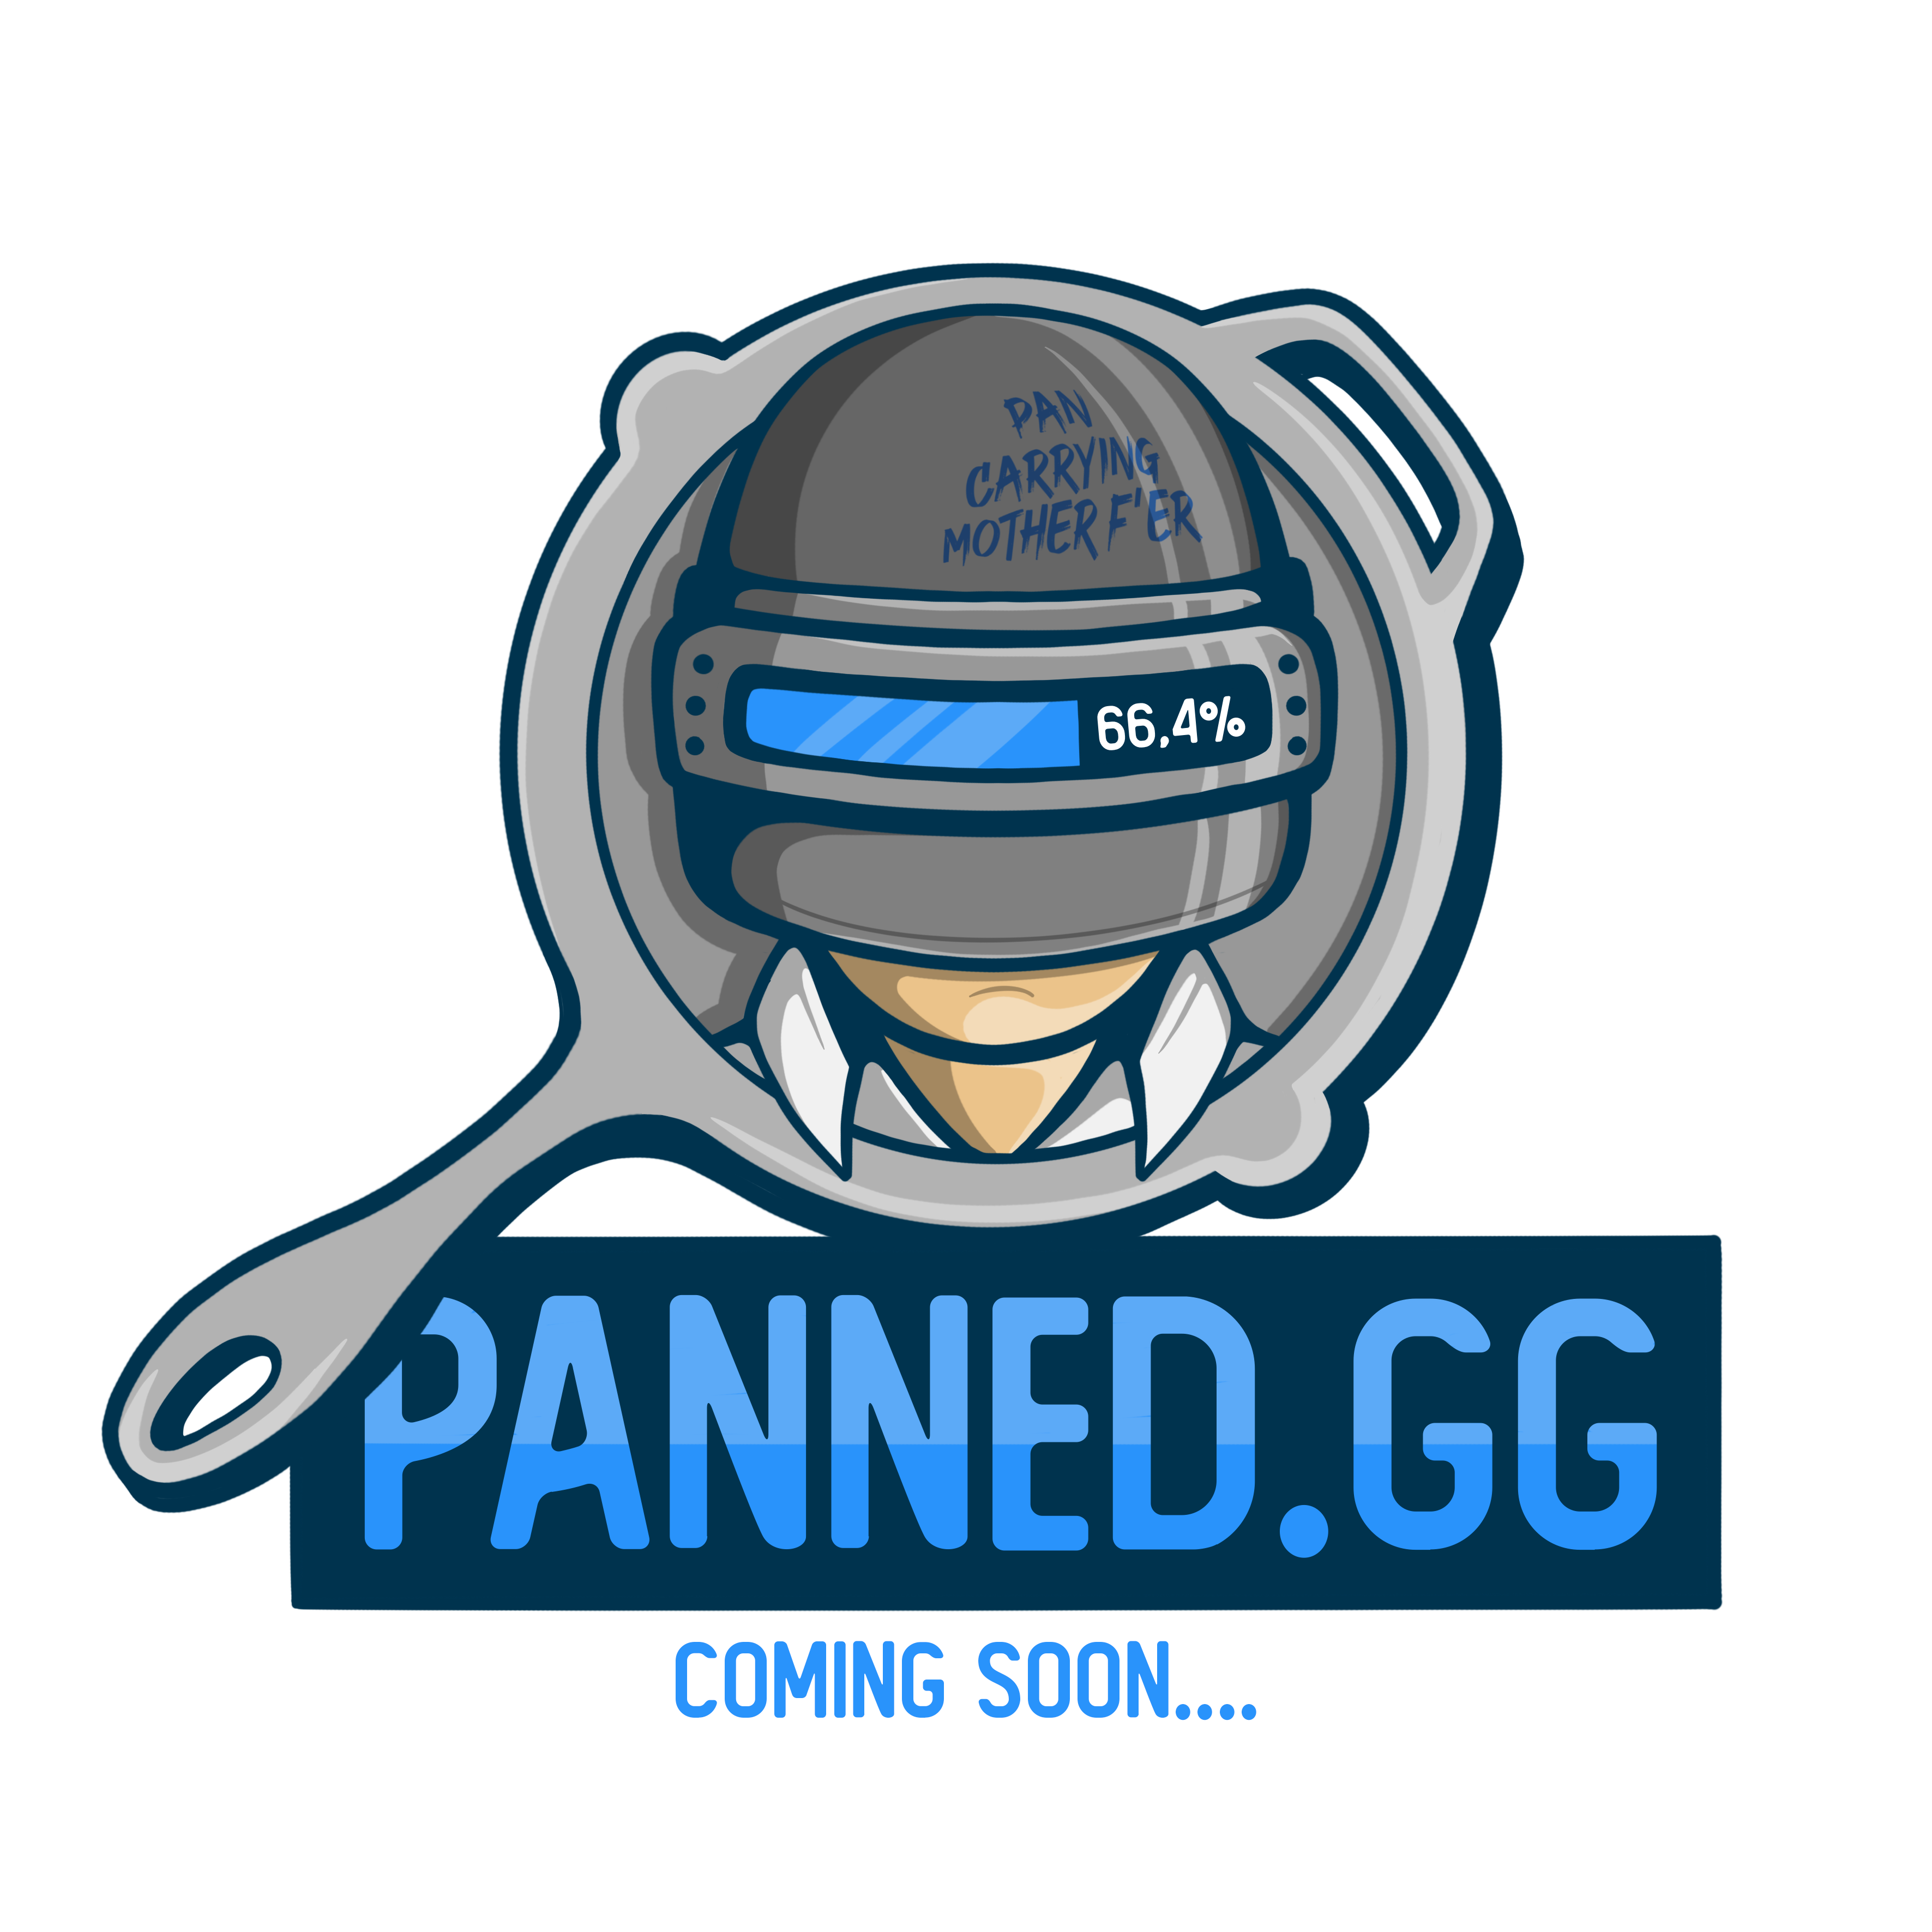 PANNED.GG Coming Soon...